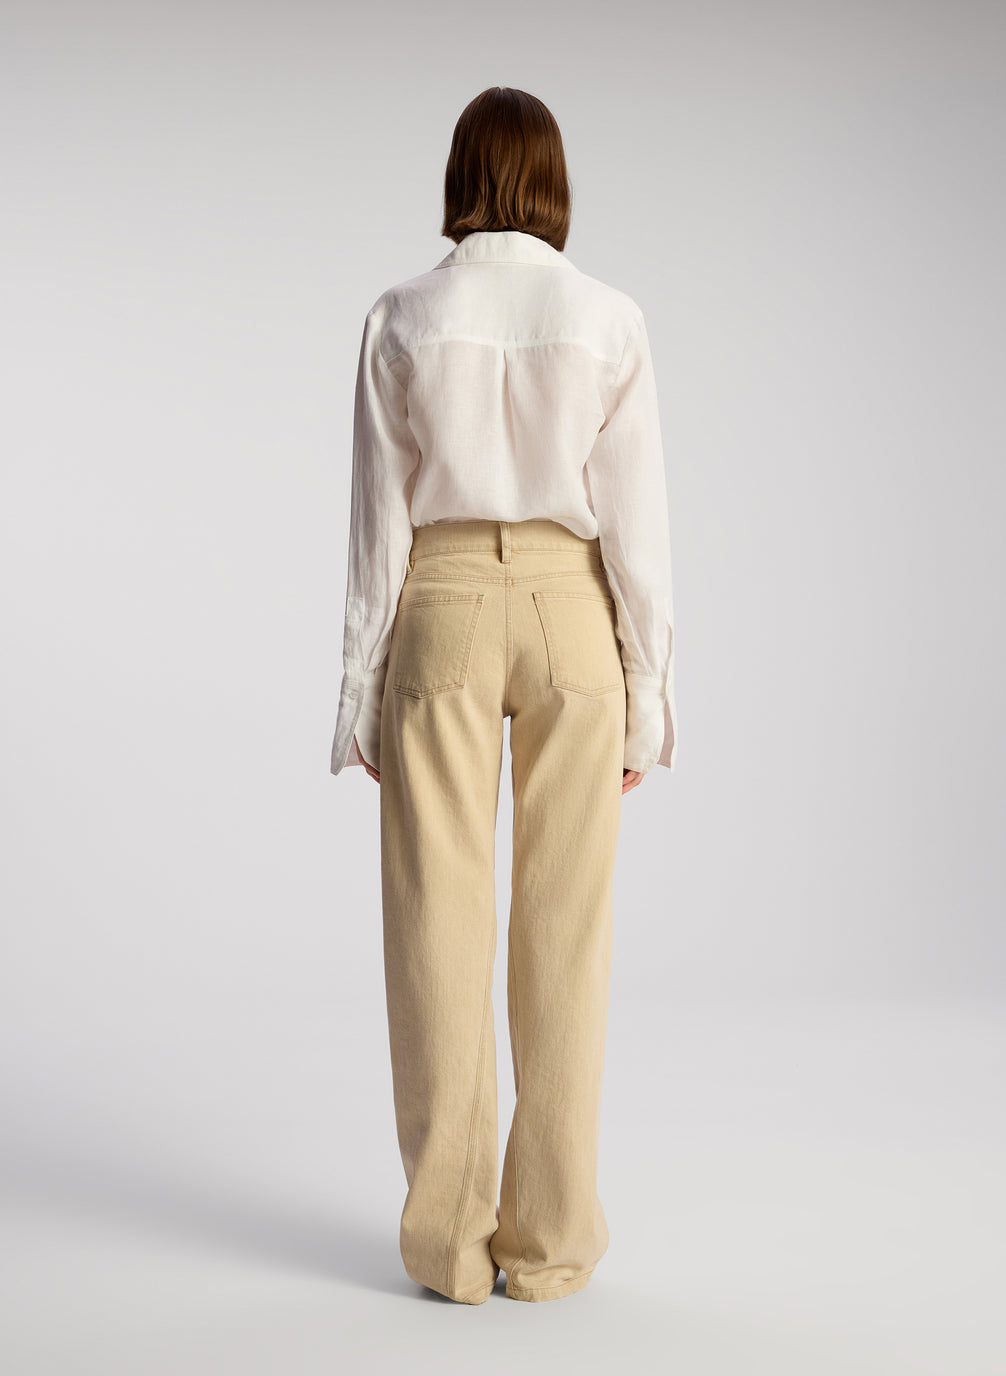 back view of woman wearing white button down shirt and tan pants